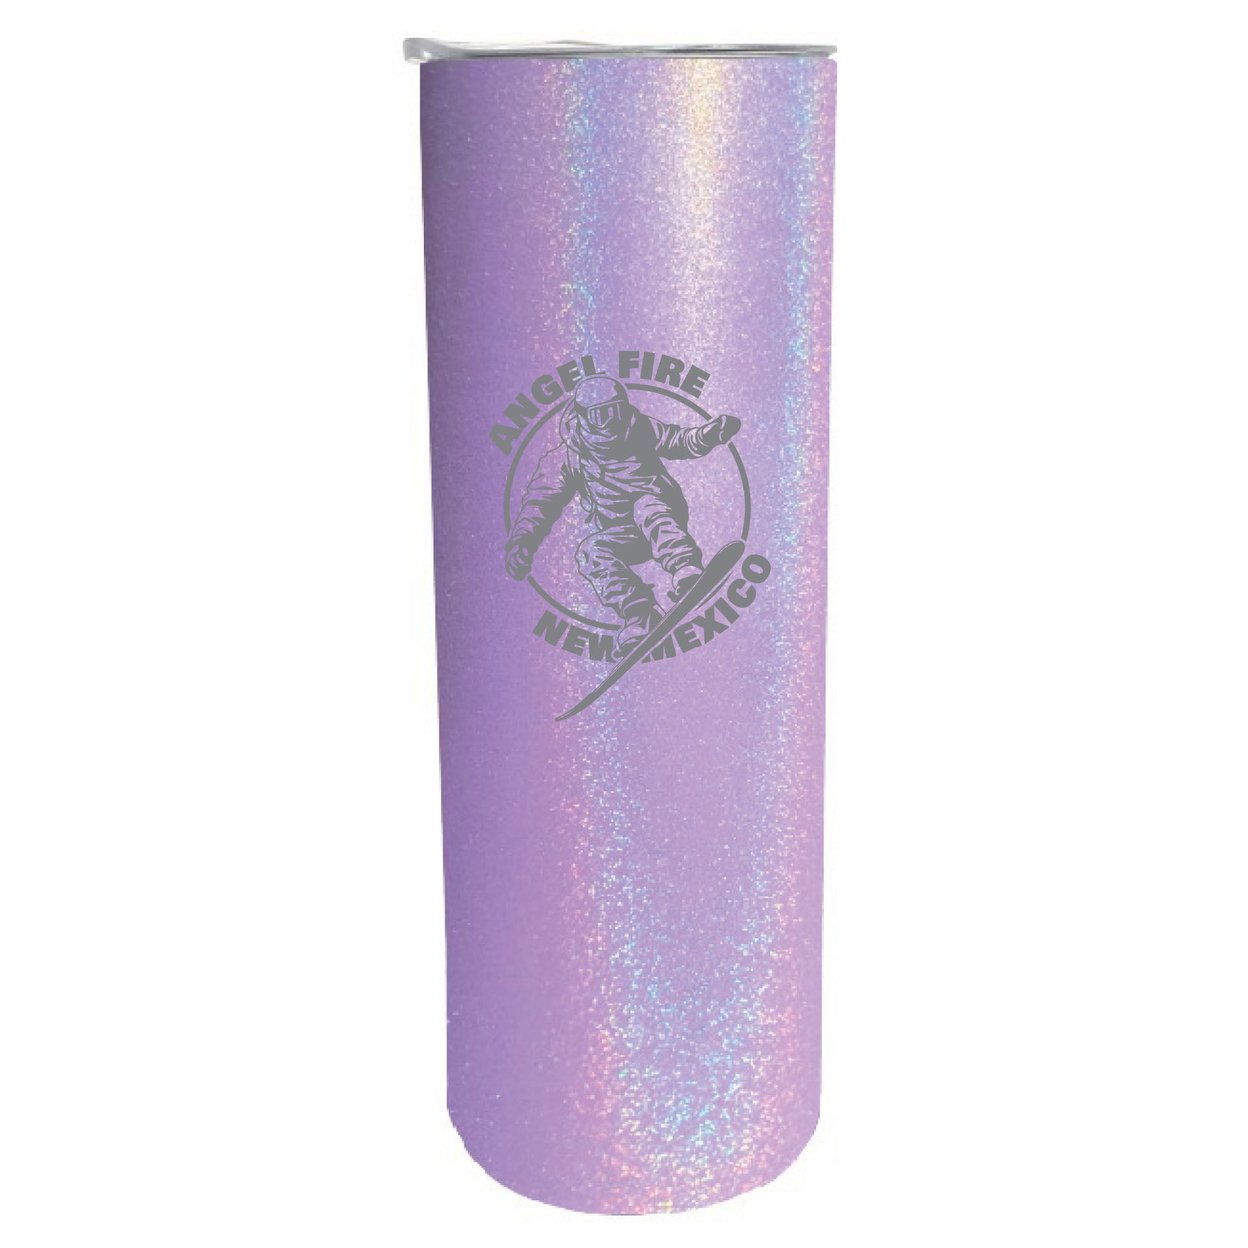 Angel Fire New Mexico Souvenir 20 Oz Engraved Insulated Stainless Steel Skinny Tumbler - Purple Glitter,,4-Pack